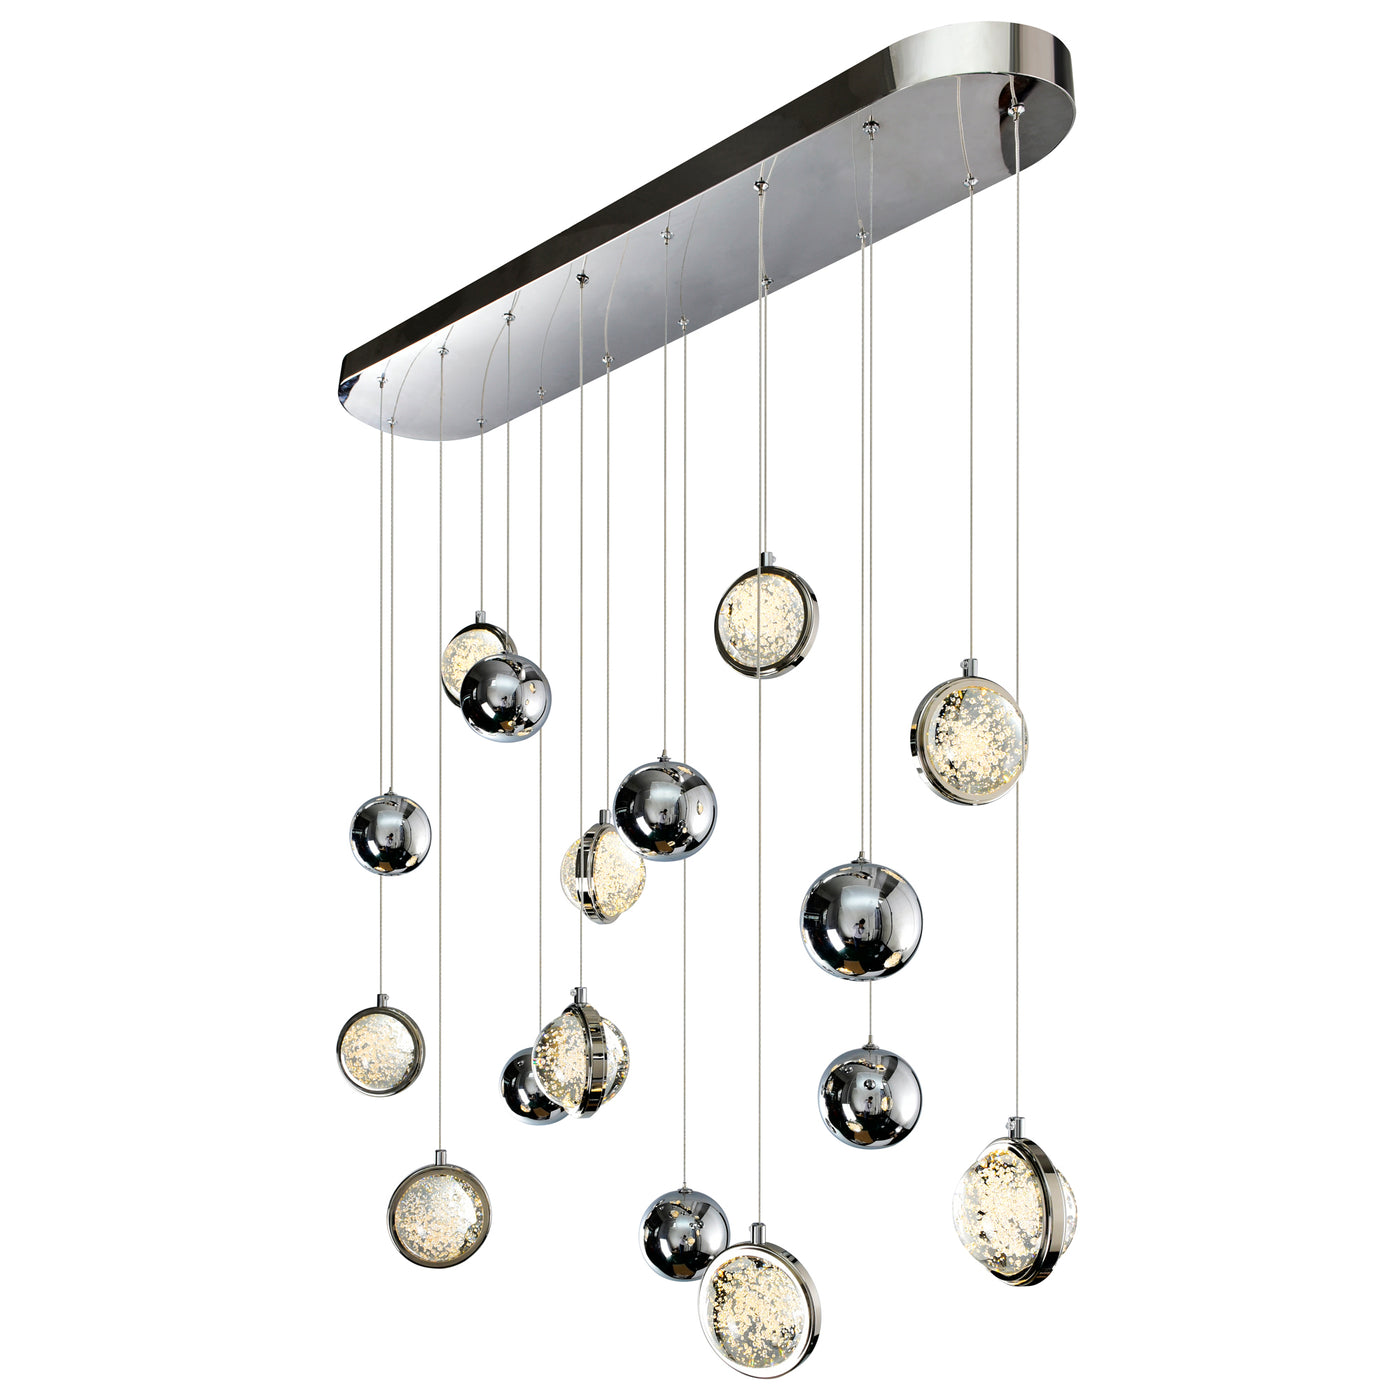 LED Polished Nickel Frame with Bubble Crystal and Chrome Globe Linear Chandelier